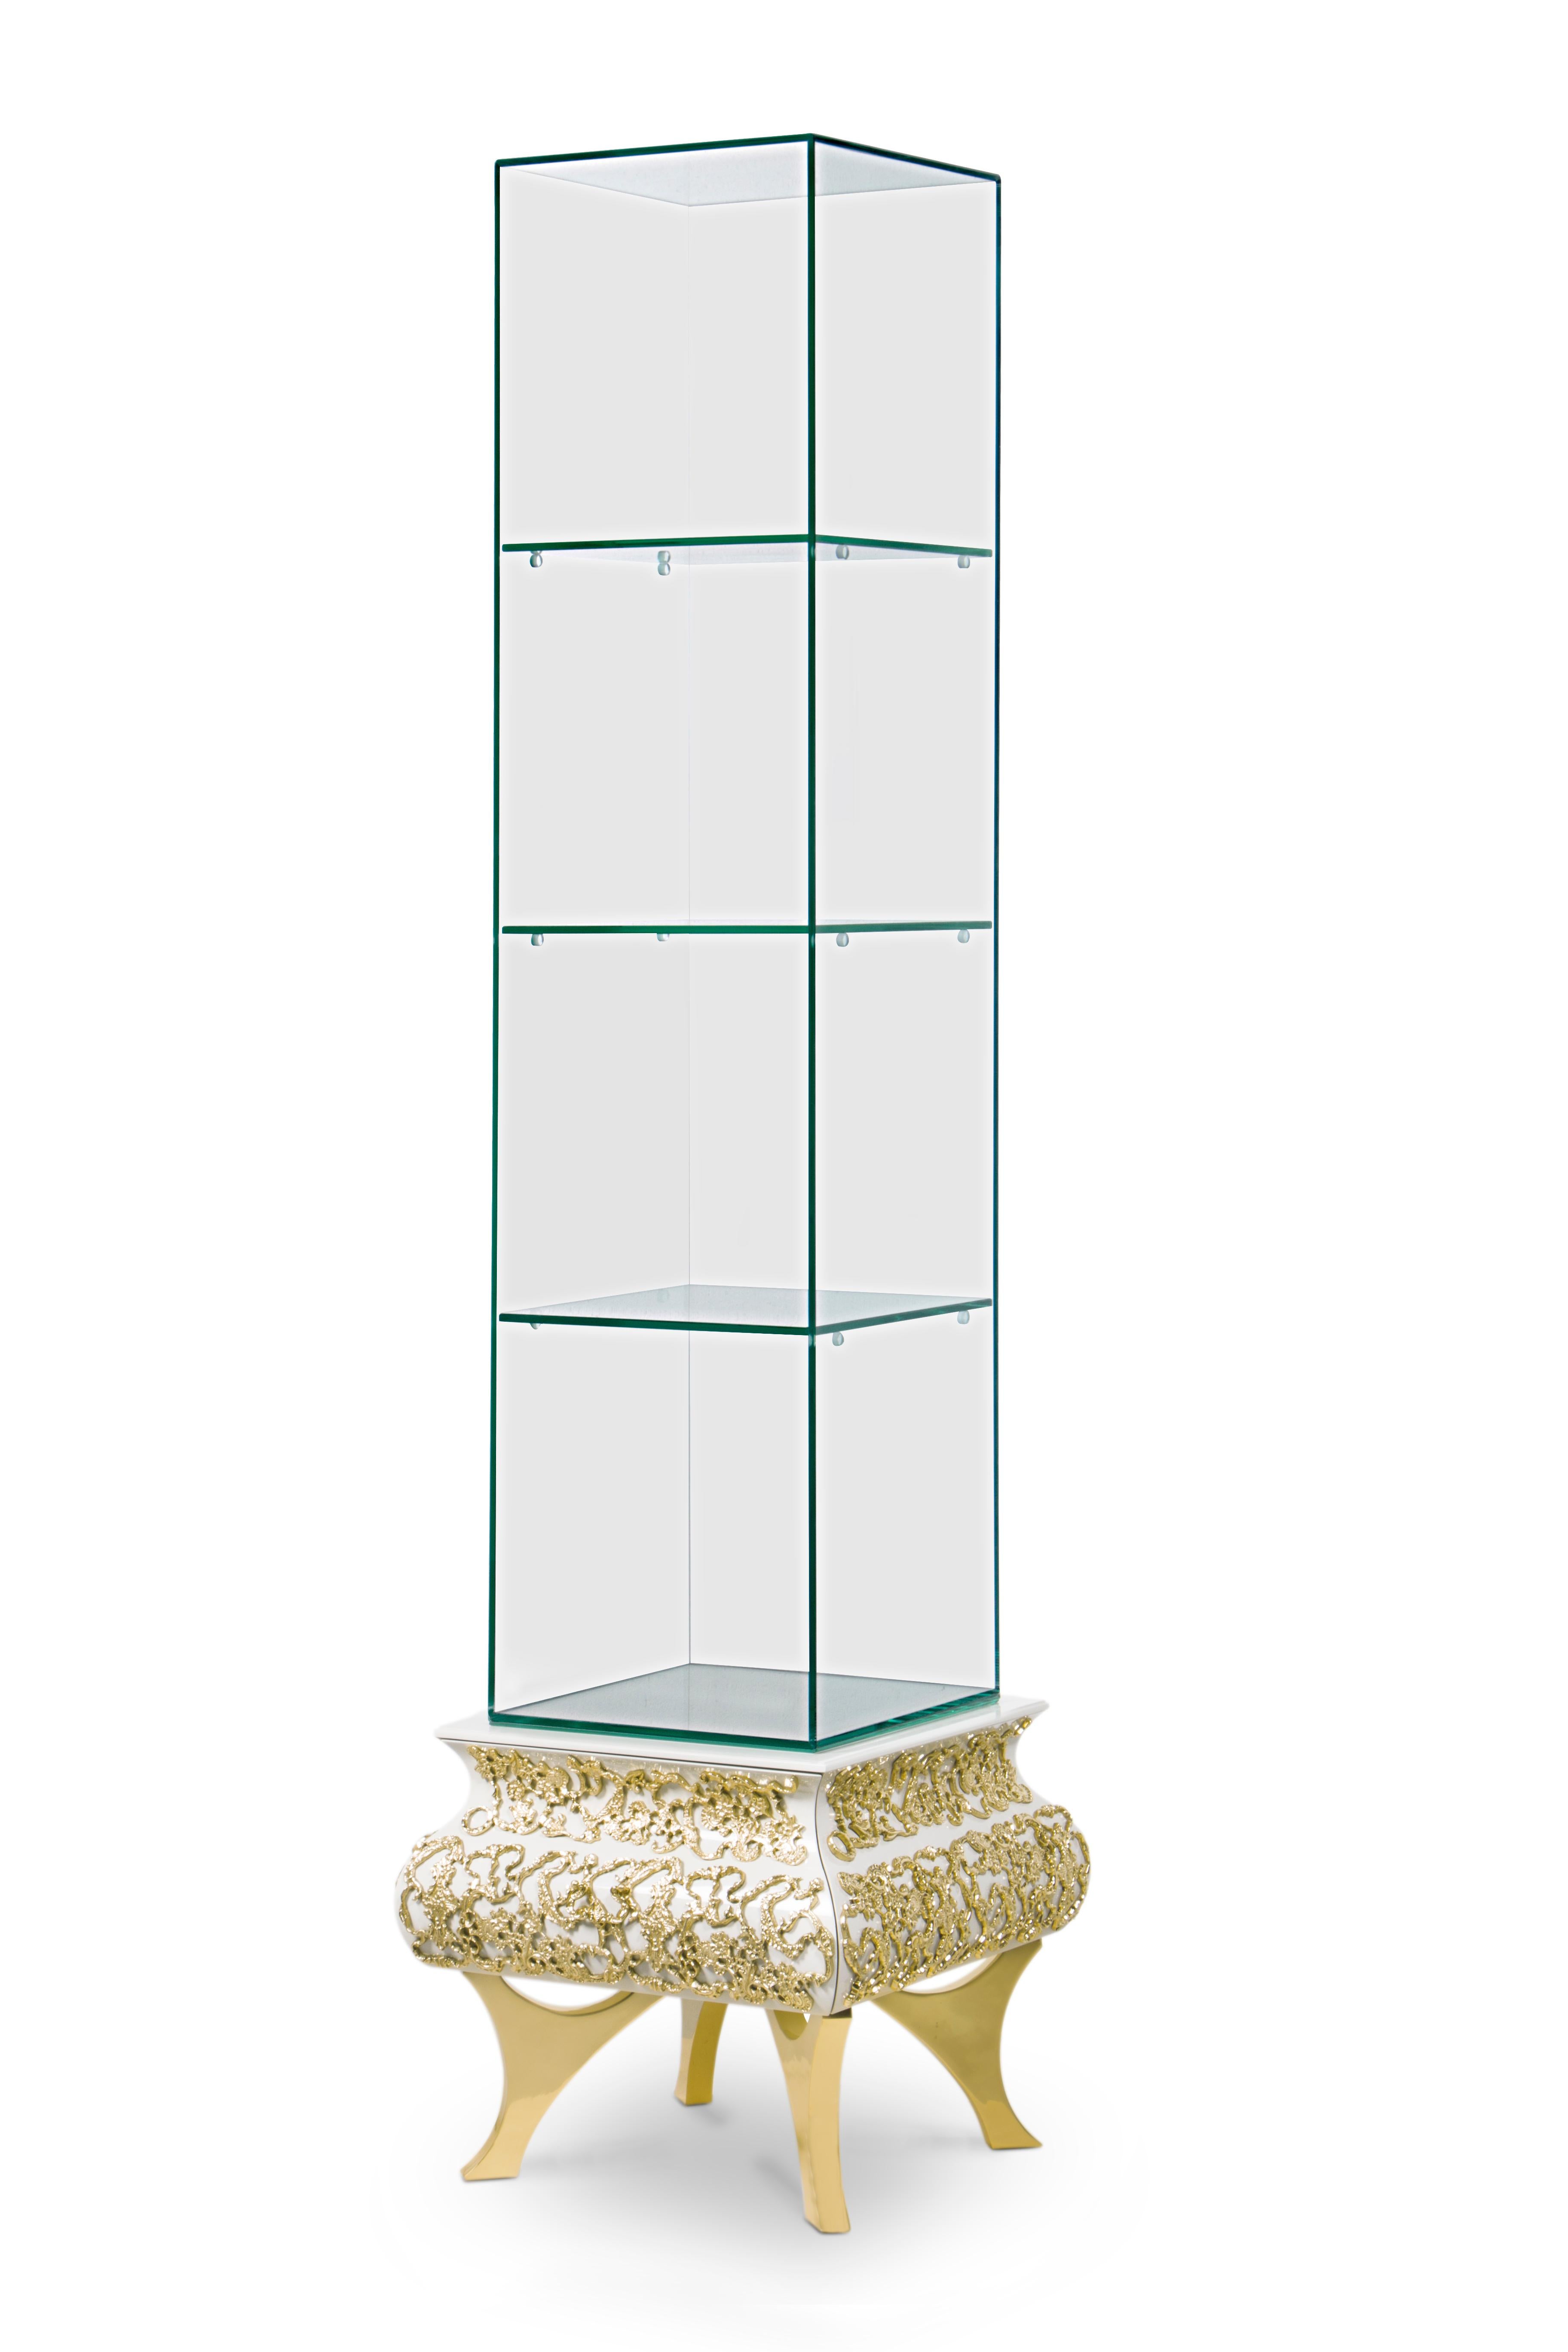 Crochet is a tall display case designed in tempered smoked glass, perfect to exhibit small sculptures, perfumes or other bathroom accessories. This cabinet has 3 shelves and an open back, on top of a wooden structure lacquered in white, accented by